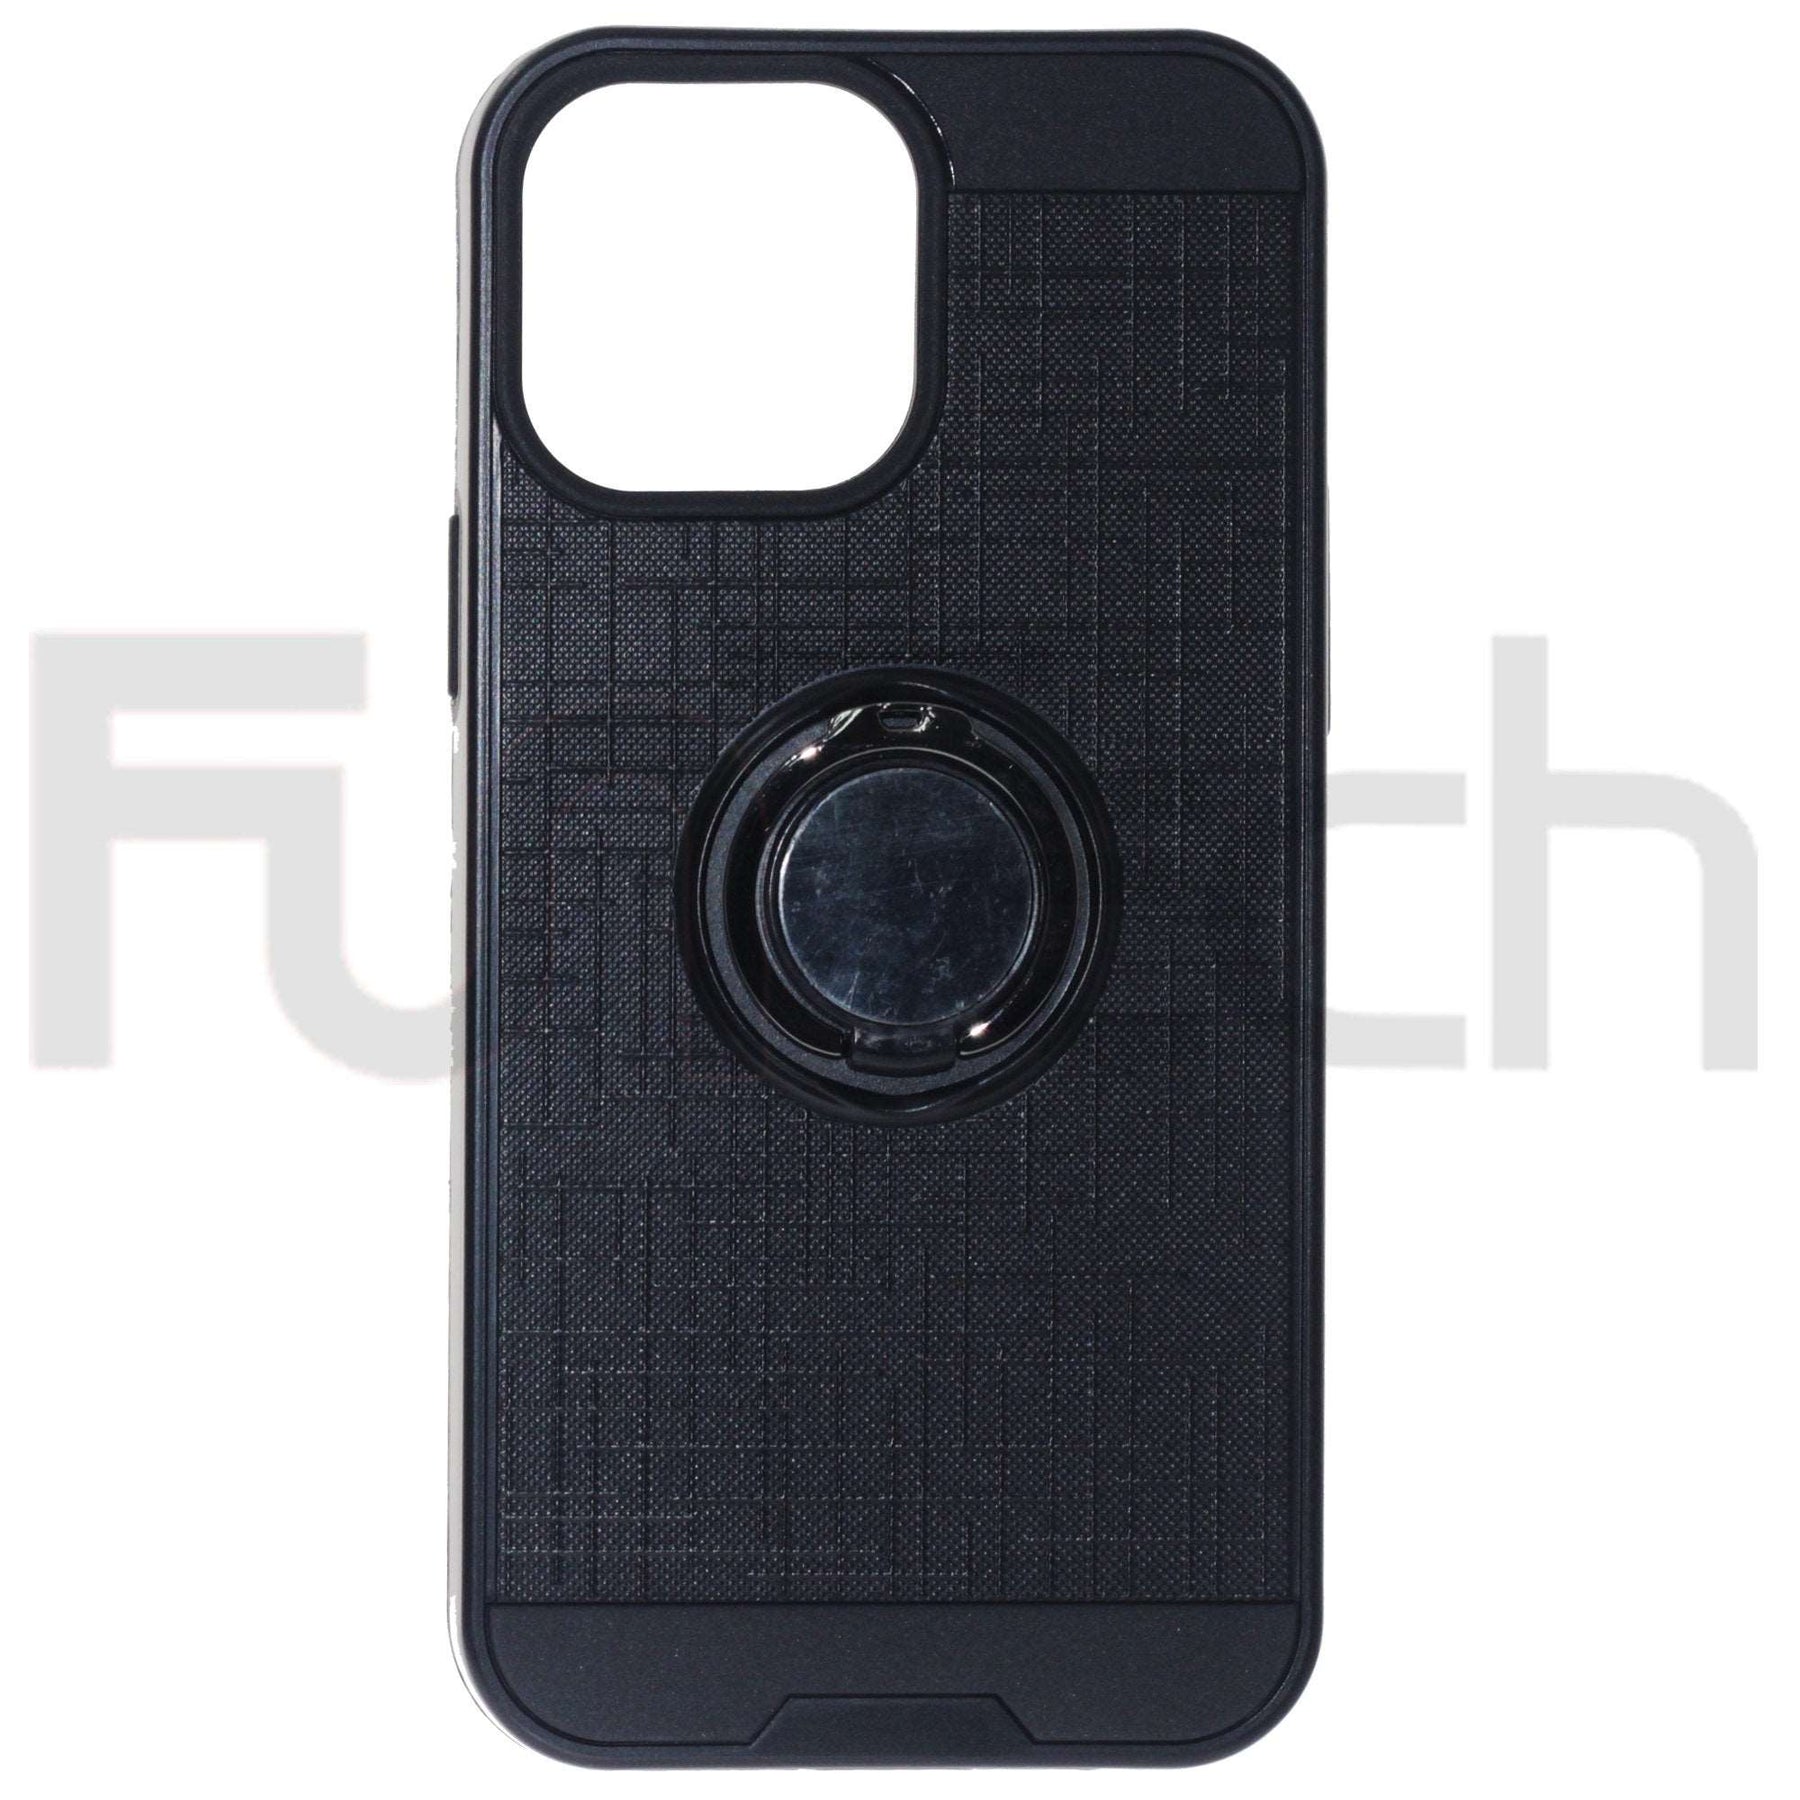  Apple iPhone 13 Pro, Ring Armor Case, Color Black.